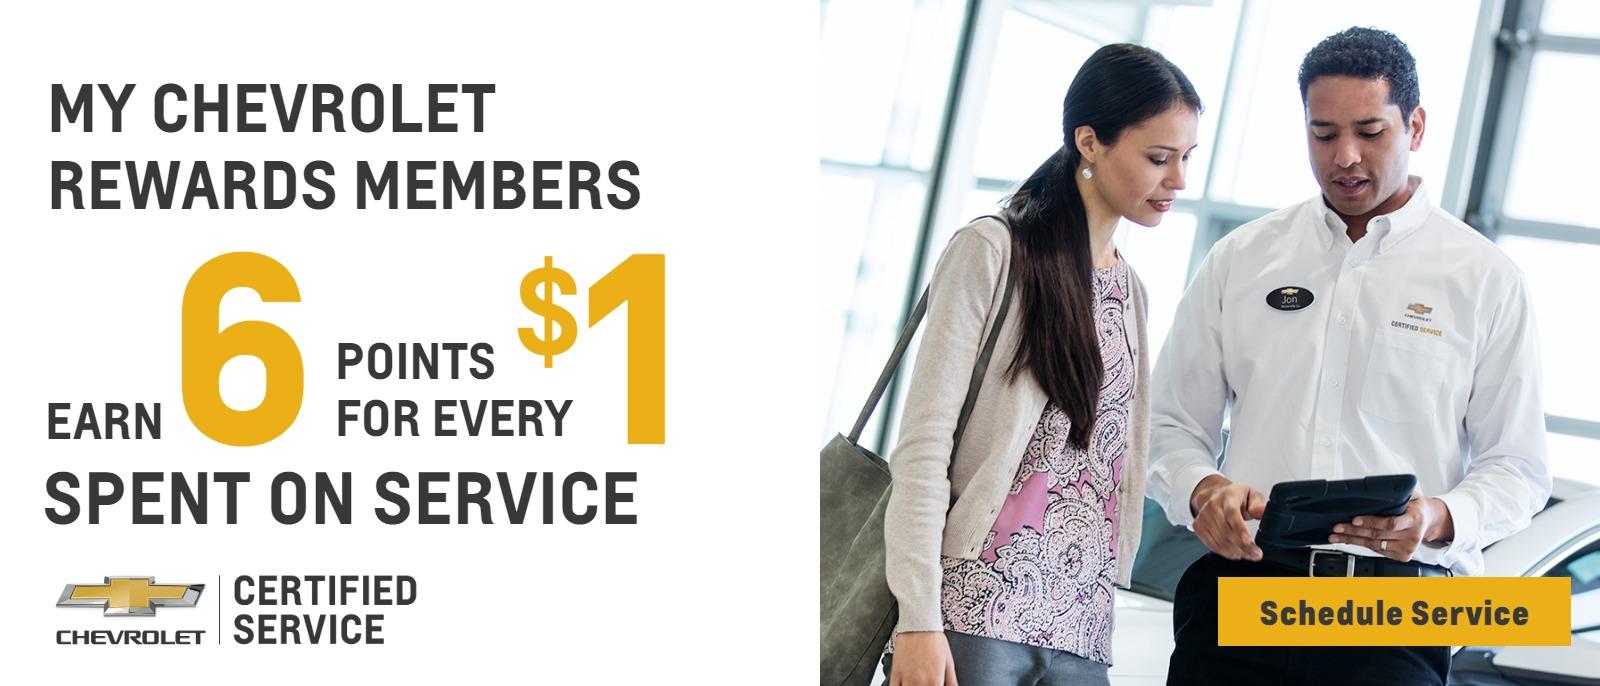 My Chevrolet Rewards Members Earn 6 Points for Every $1 Spent on Service